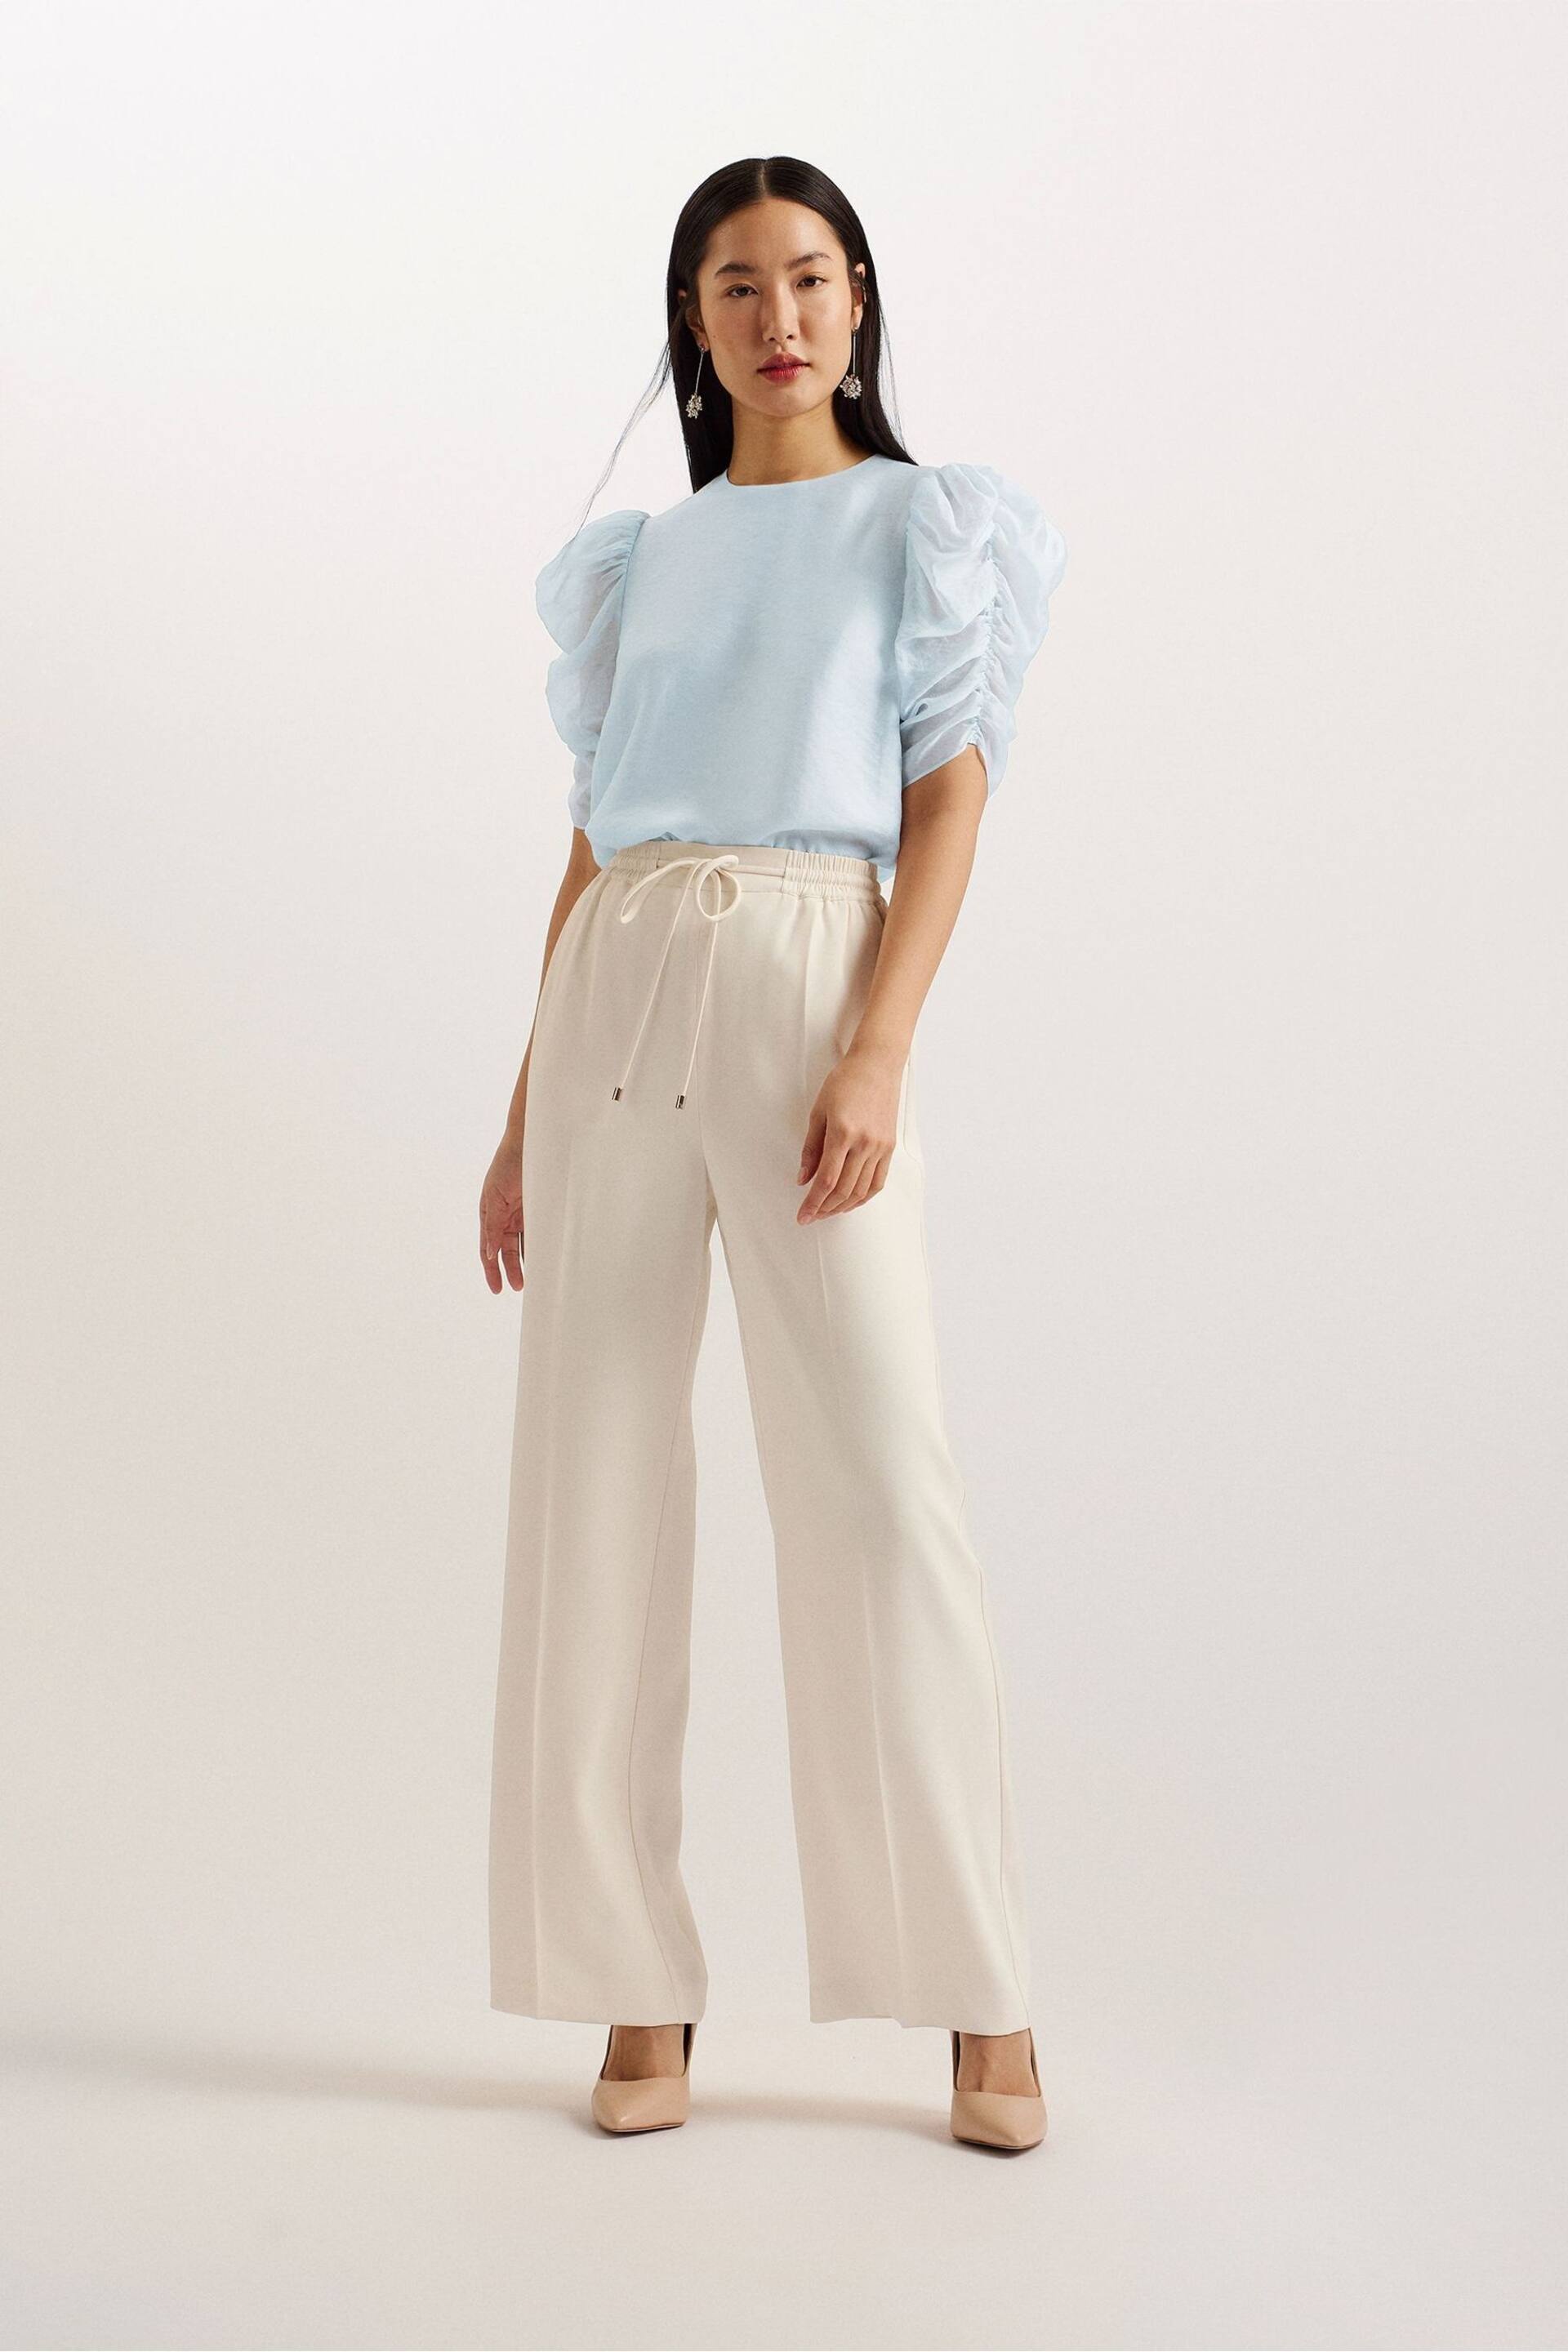 Ted Baker Blue Sachiko Pleated Puff Sleeve Top - Image 1 of 6